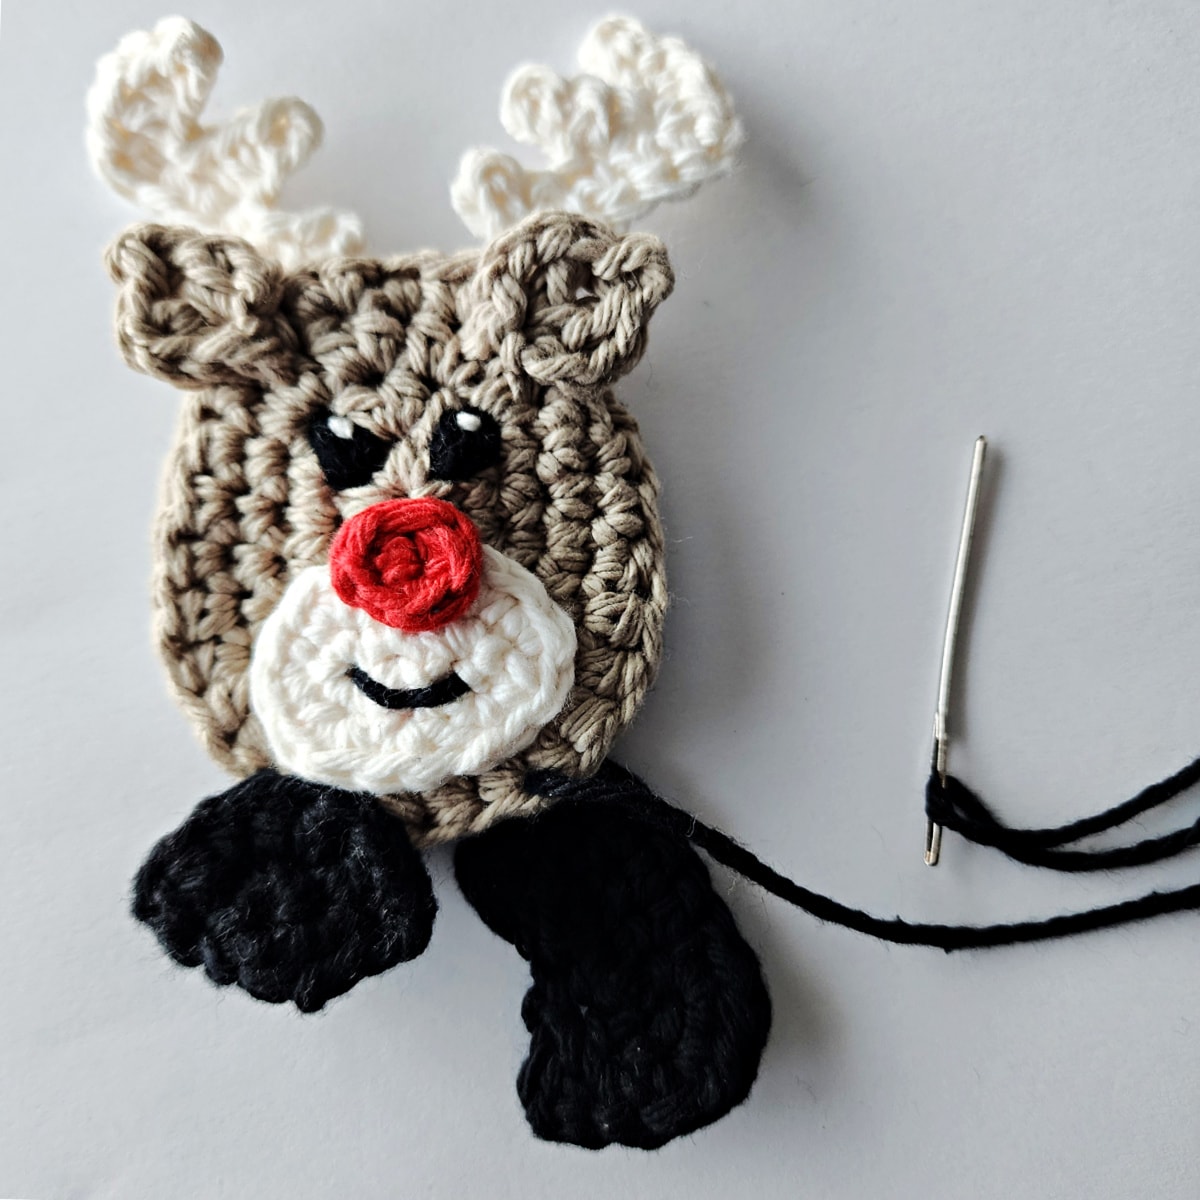 crochet reindeer candy cane holder ornament tutorial for attaching candy cane holder hooves